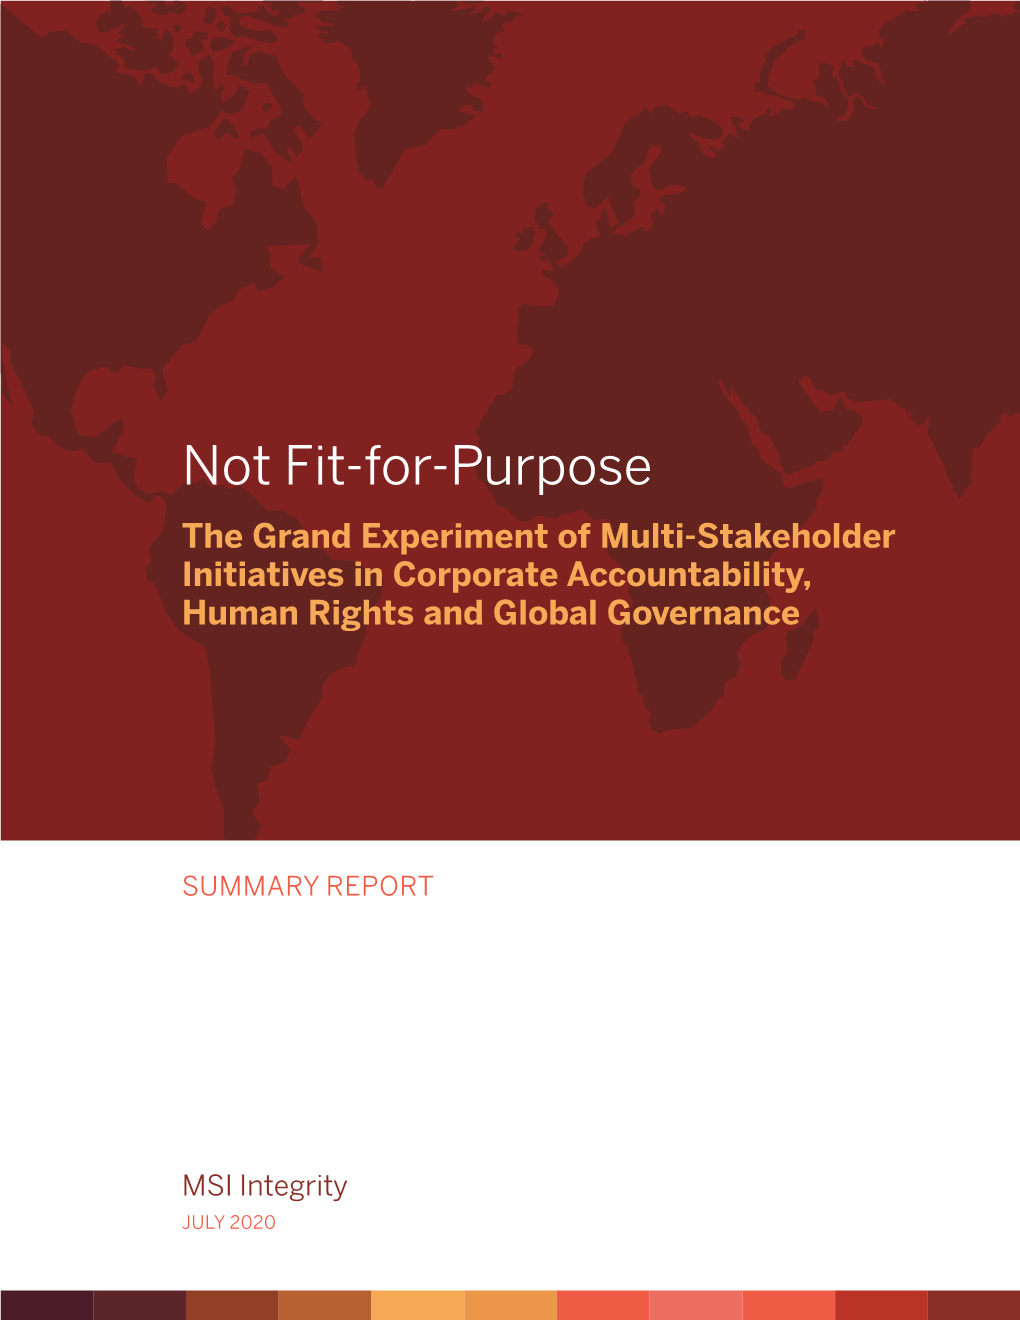 Not Fit-For-Purpose the Grand Experiment of Multi-Stakeholder Initiatives in Corporate Accountability, Human Rights and Global Governance